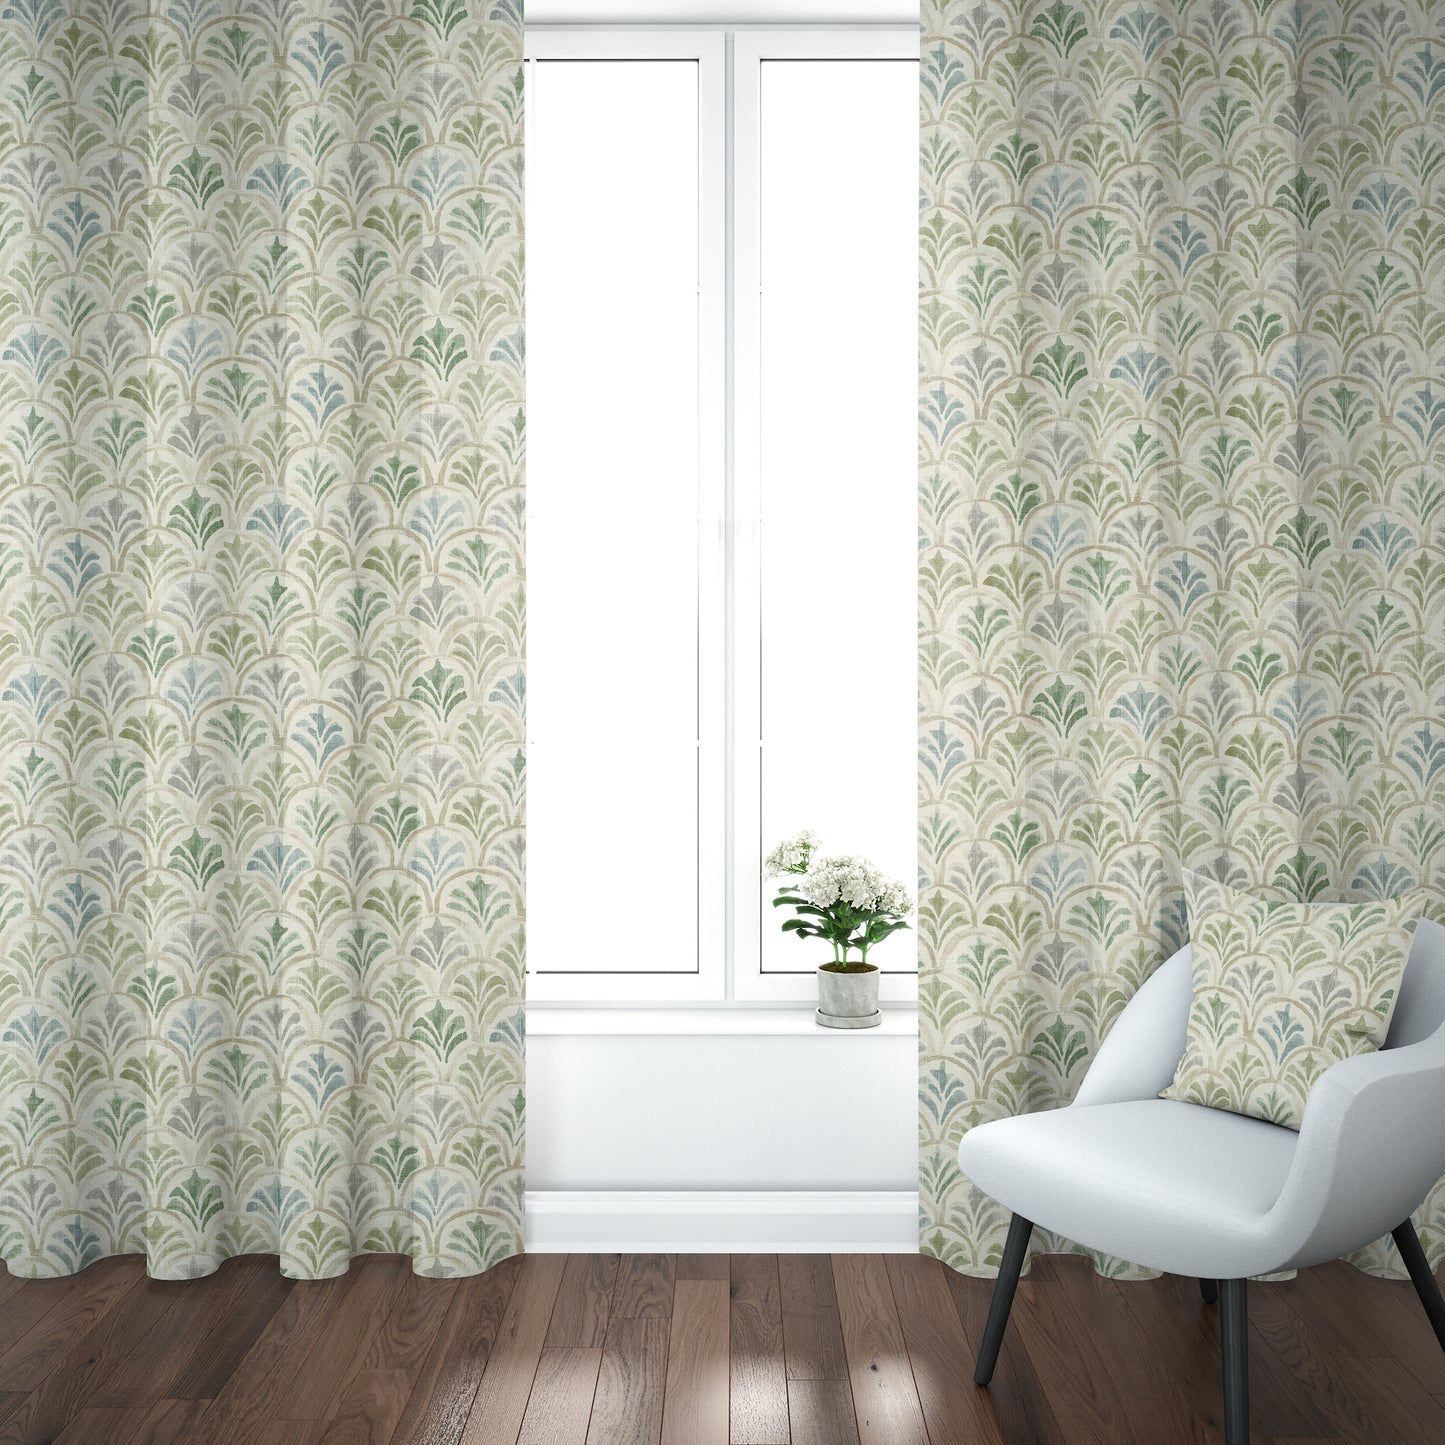 Tab Top Curtain Panels Pair in Countess Bay Green Scallop Watercolor